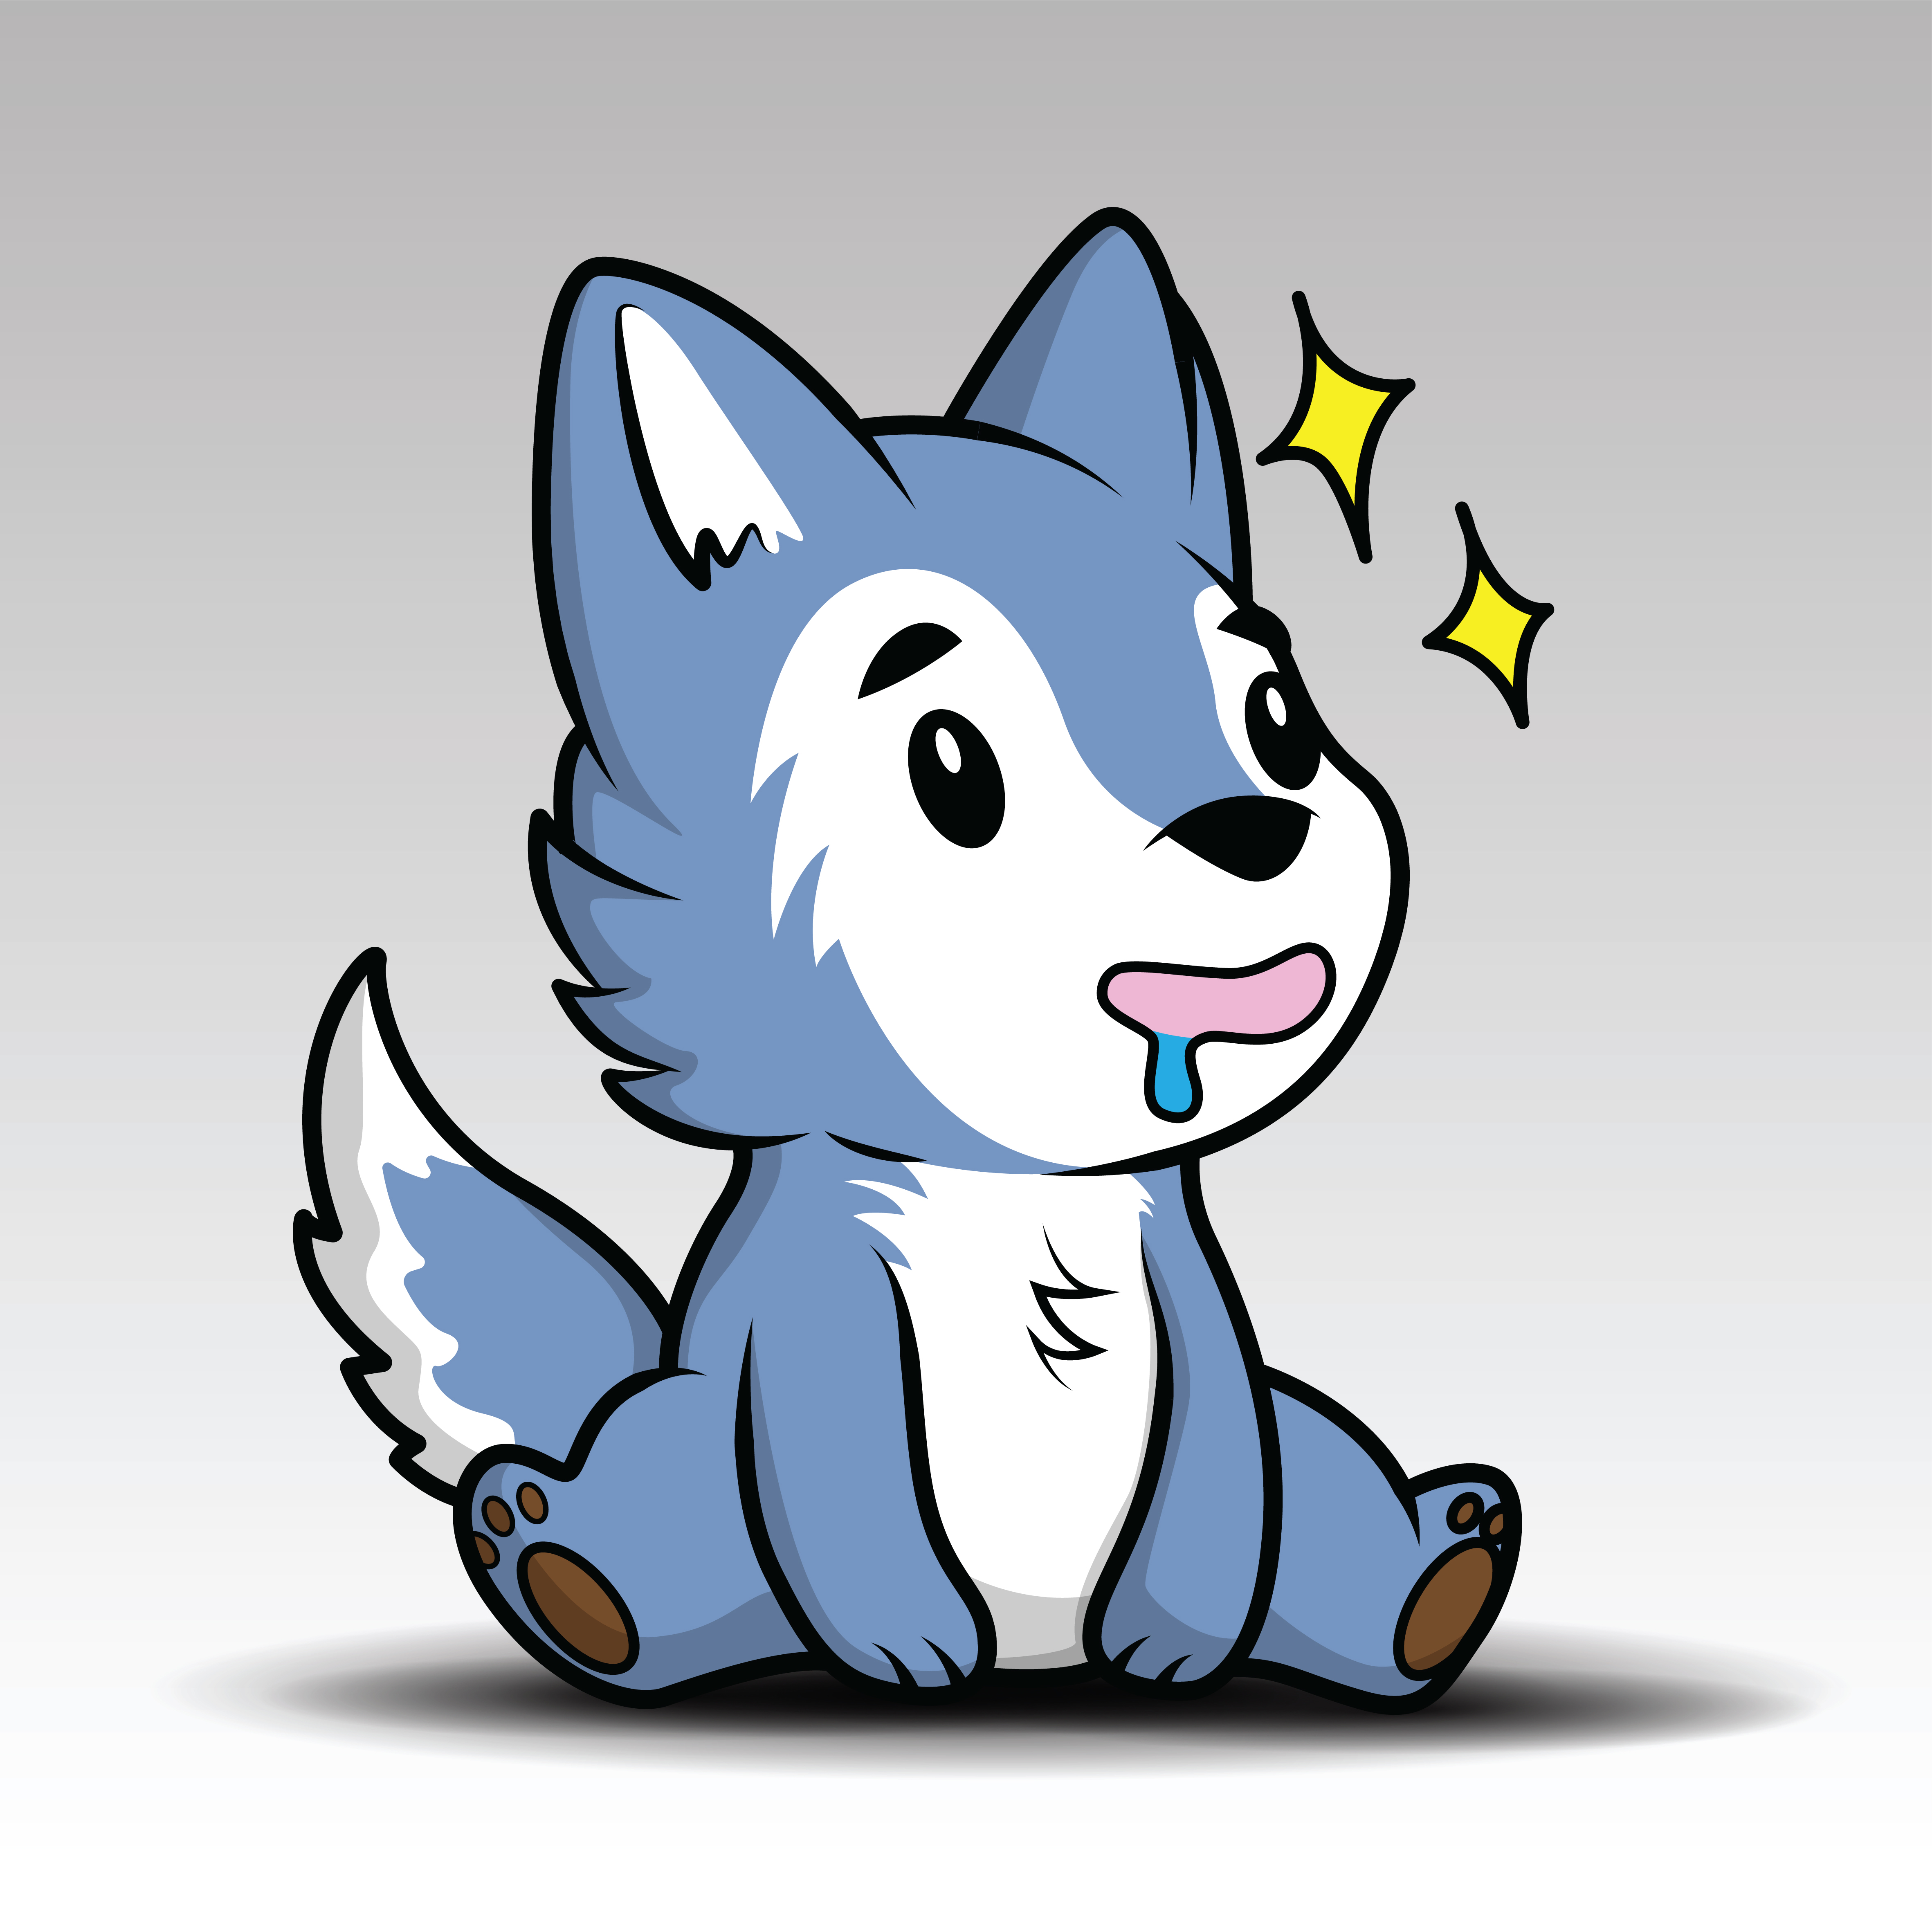 —Pngtree—vector cute cartoon wolf_5057900.png